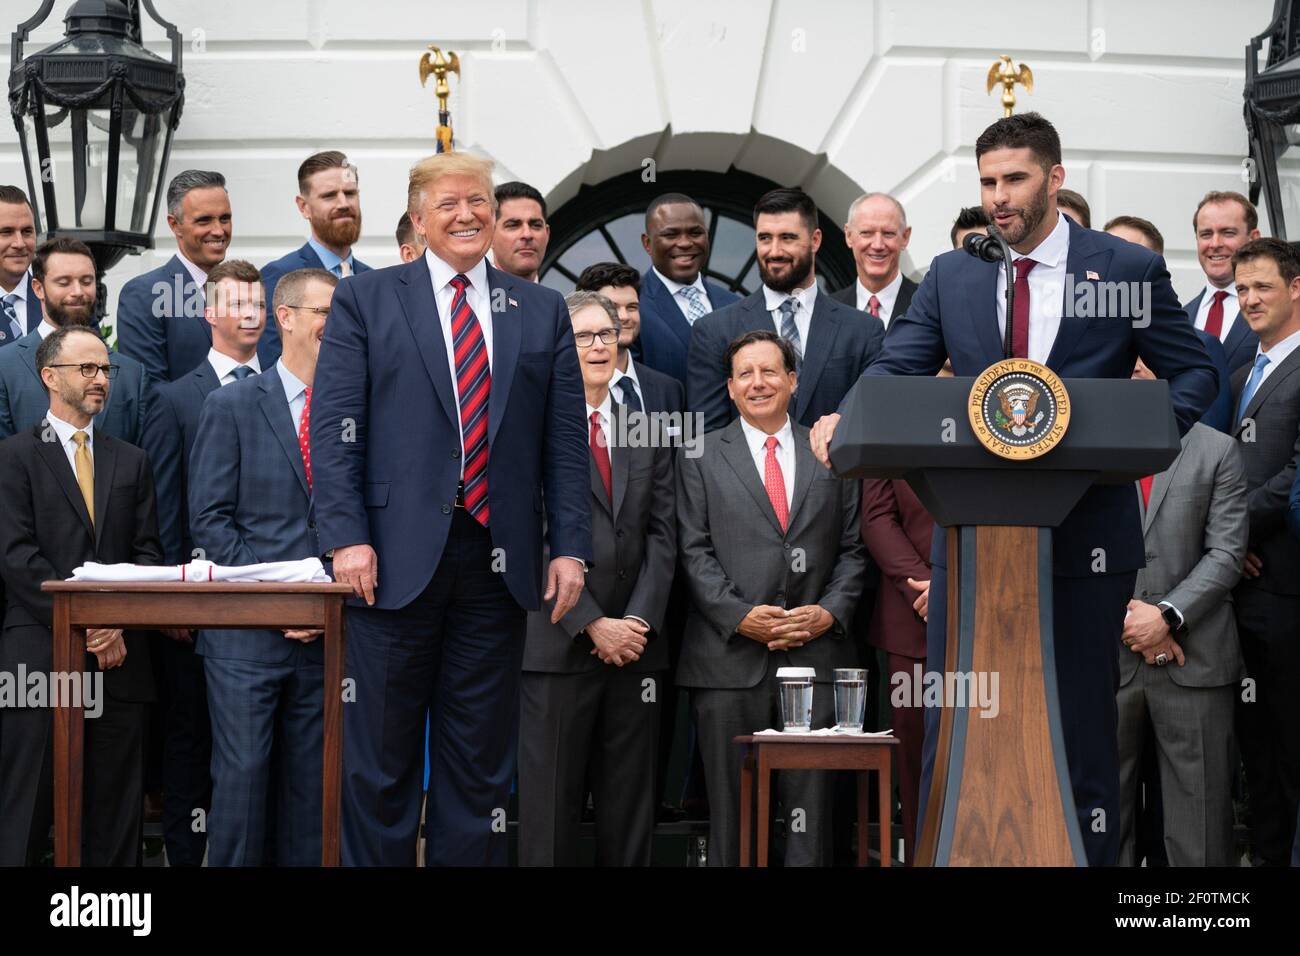 President Donald Trump welcomes the 2018 World Series Champion Boston Red Sox baseball team Thursday May 9 2019 at ceremonies on the South Portico entrance of the White House. Stock Photo